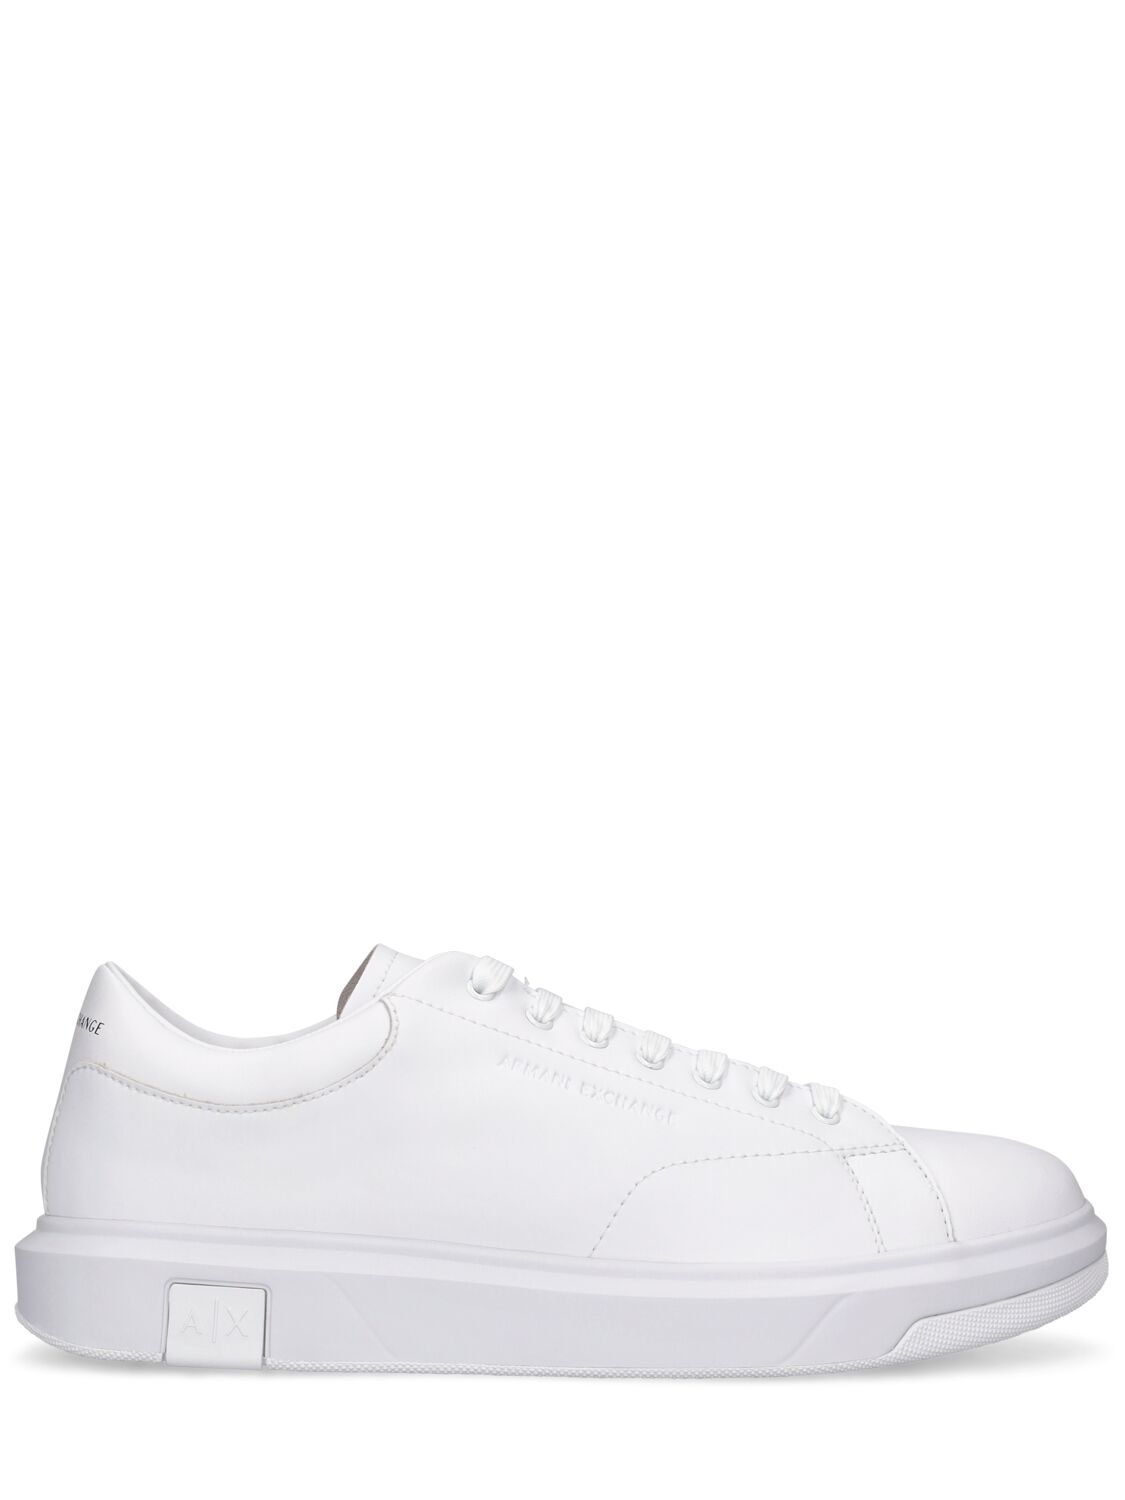 Armani Exchange Leather Low Top Sneakers In White